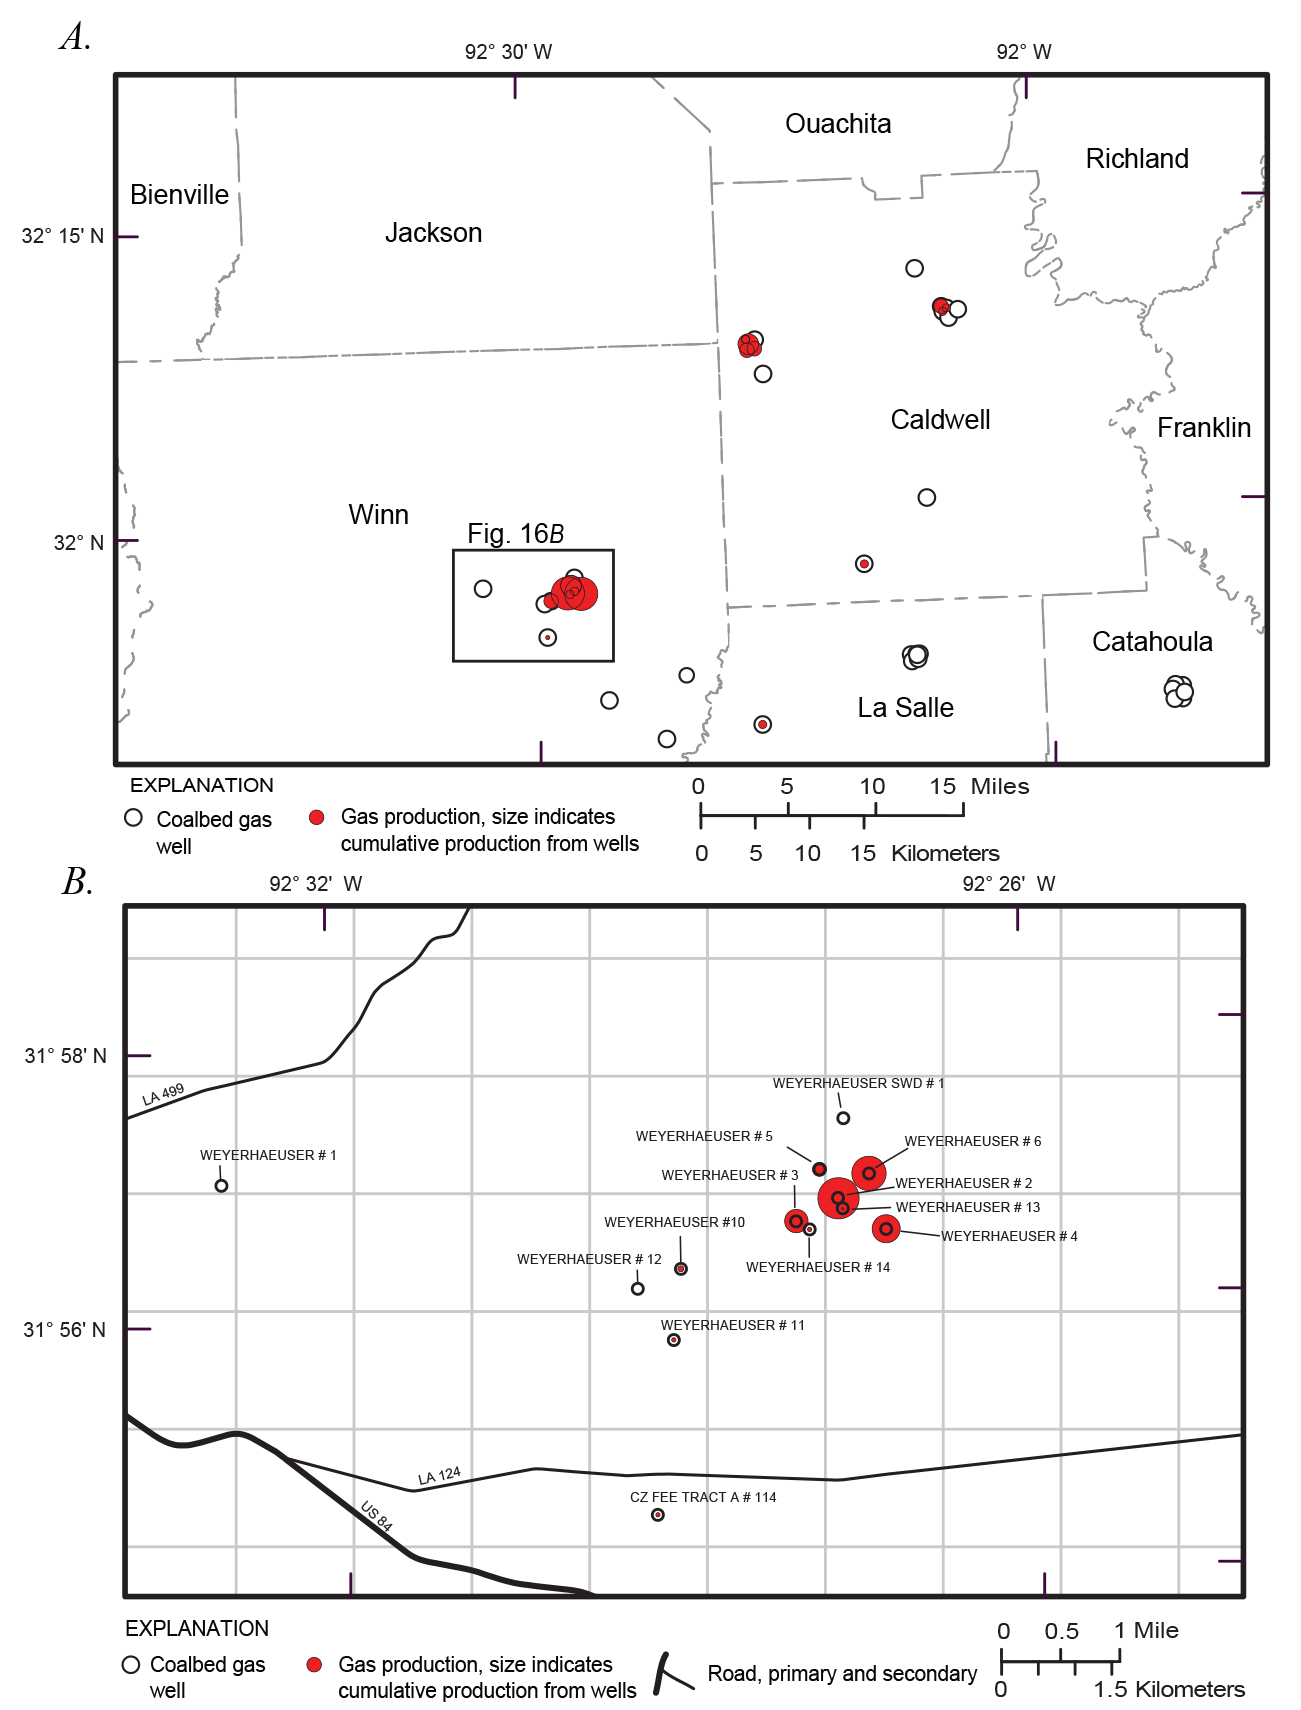 Points on two maps where the size of the red fill indicates relative well production.